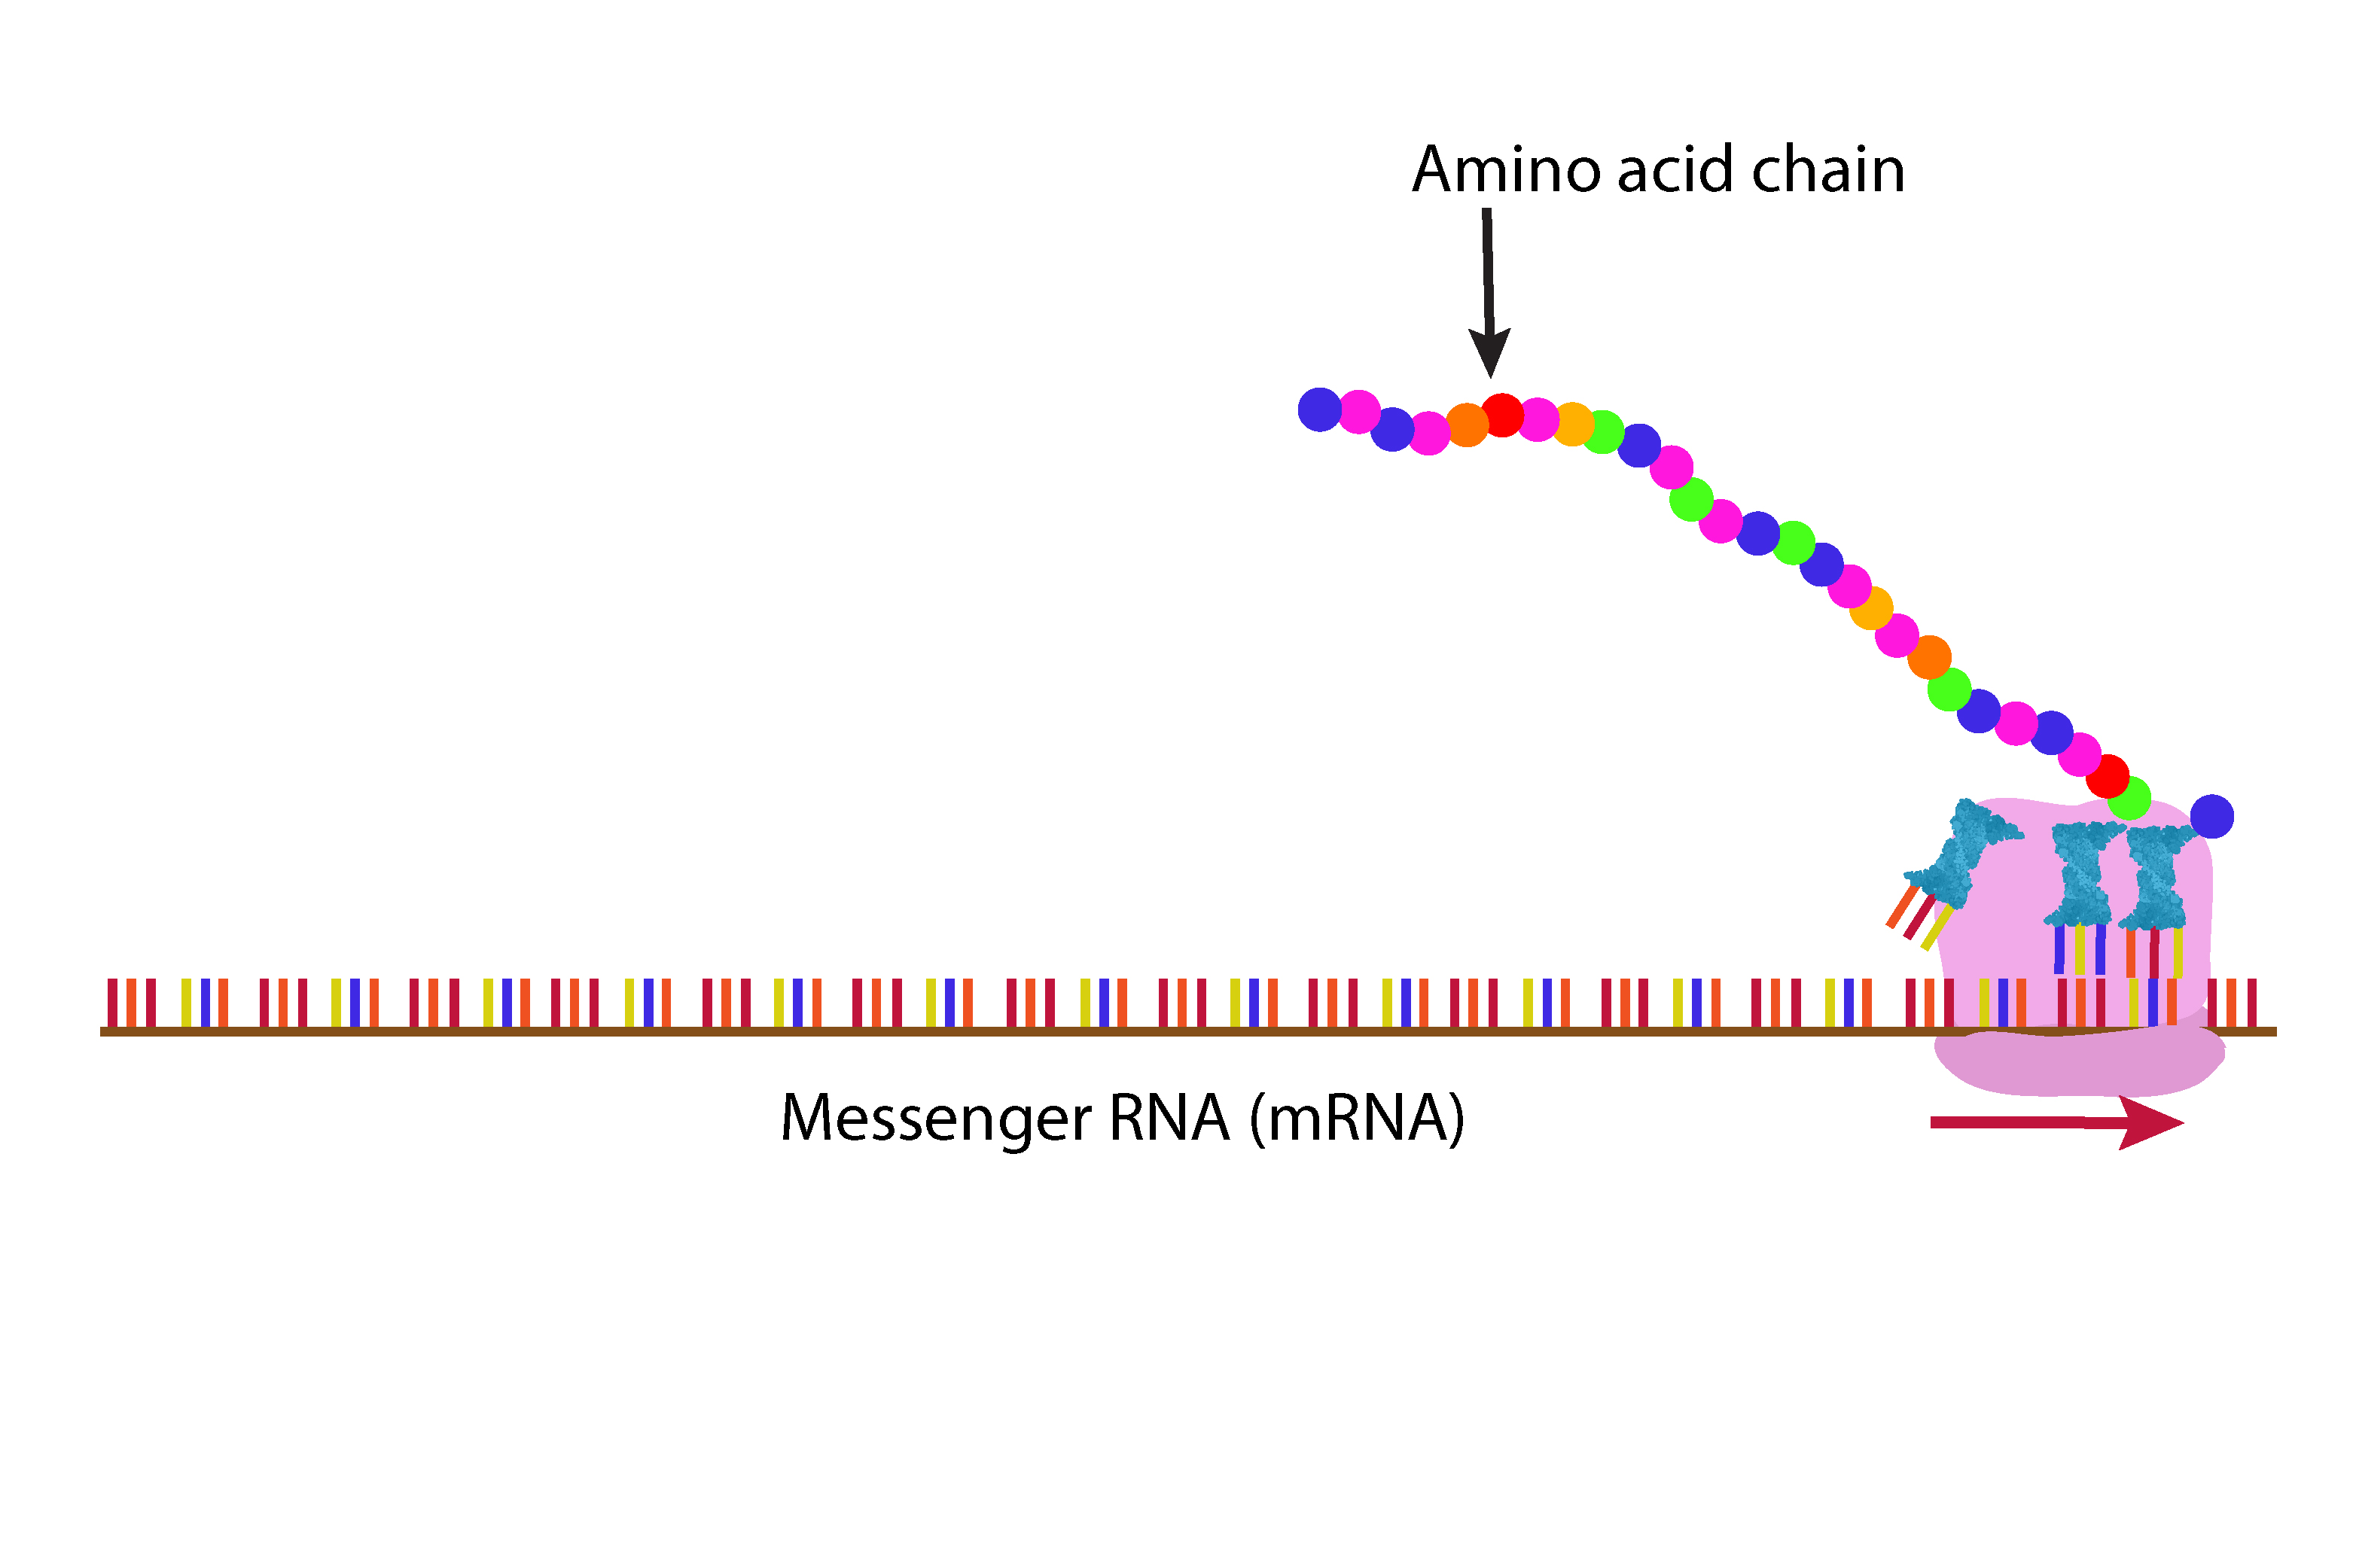 As the ribosome nears the end of the mRNA it has made a long chain of protein in this case haemoglobin